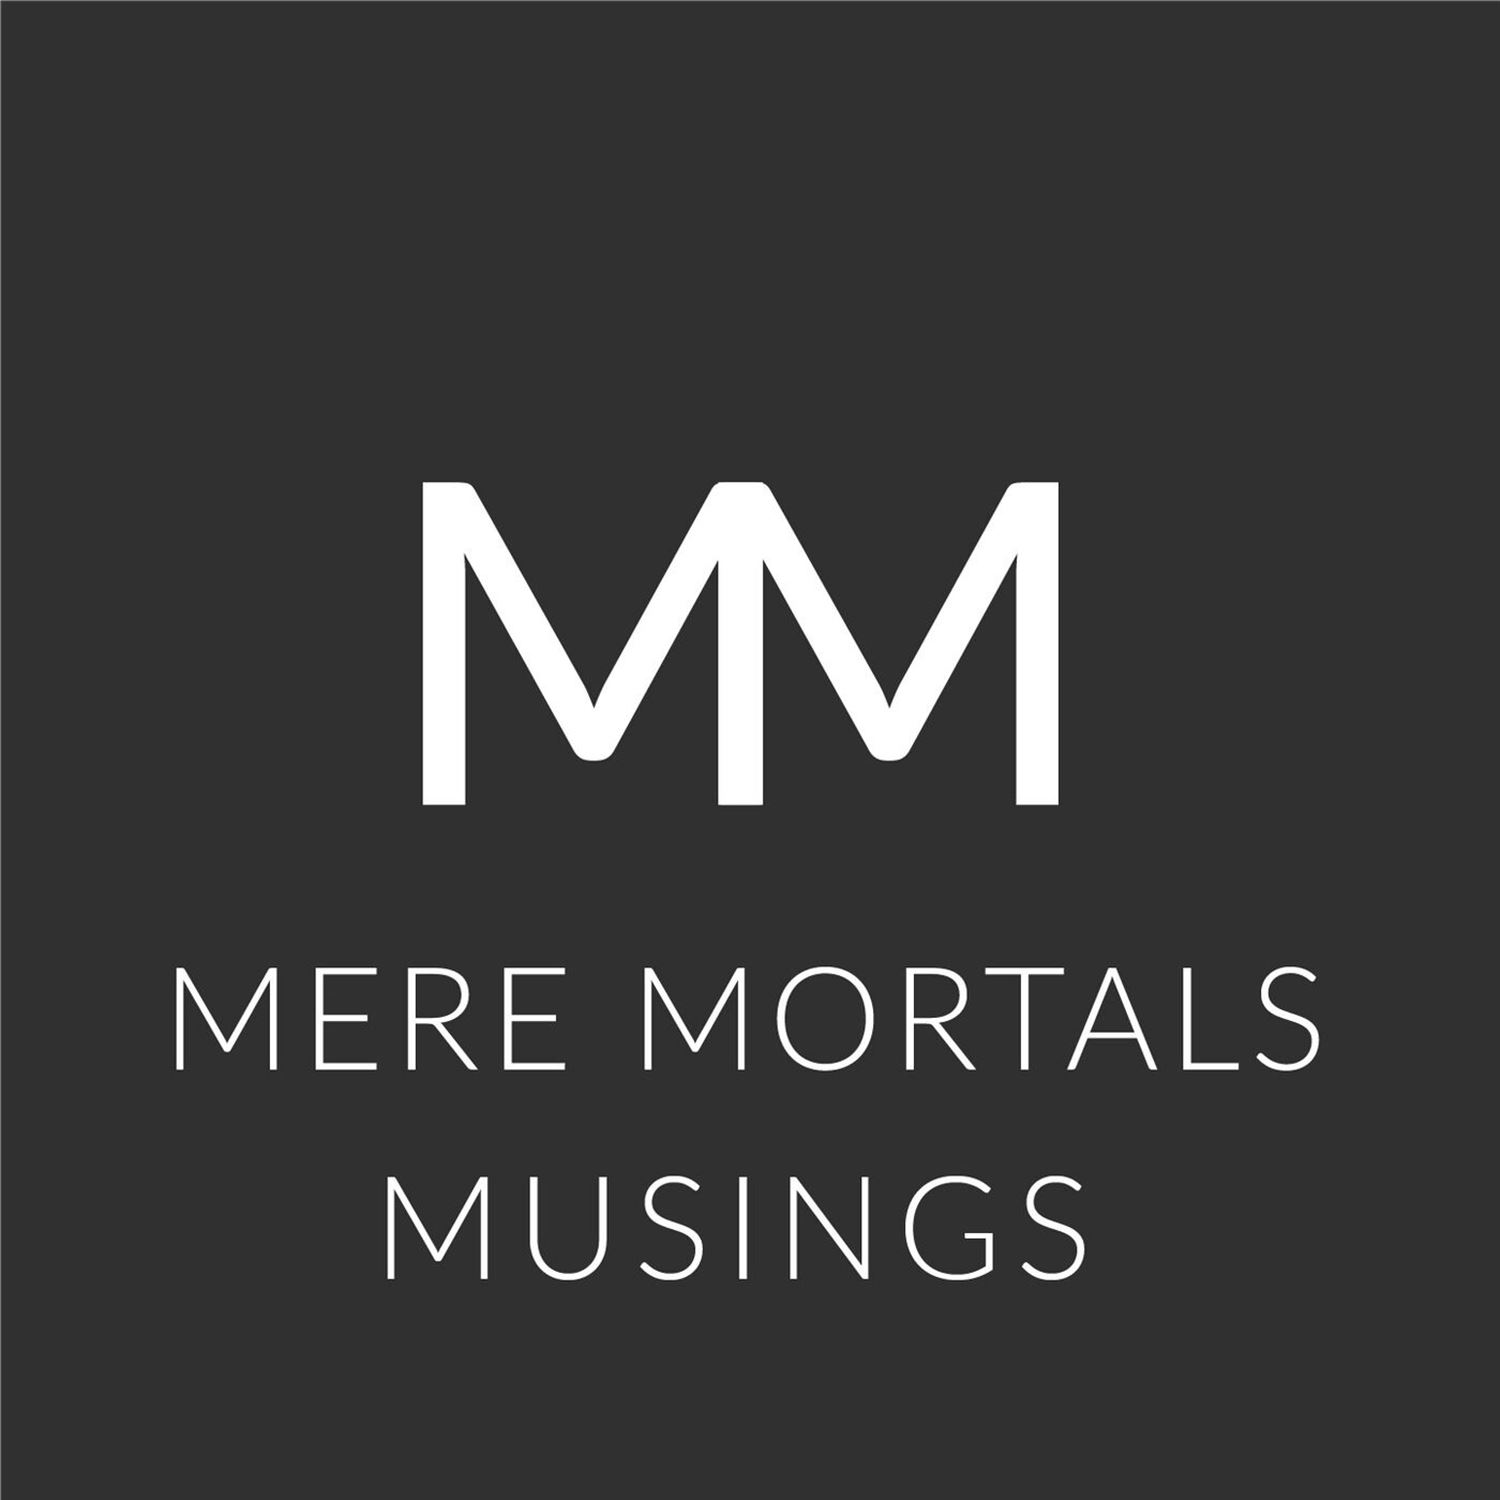 How Often Should One Review Old Information? (Mere Mortals Episode #66 - Musings)